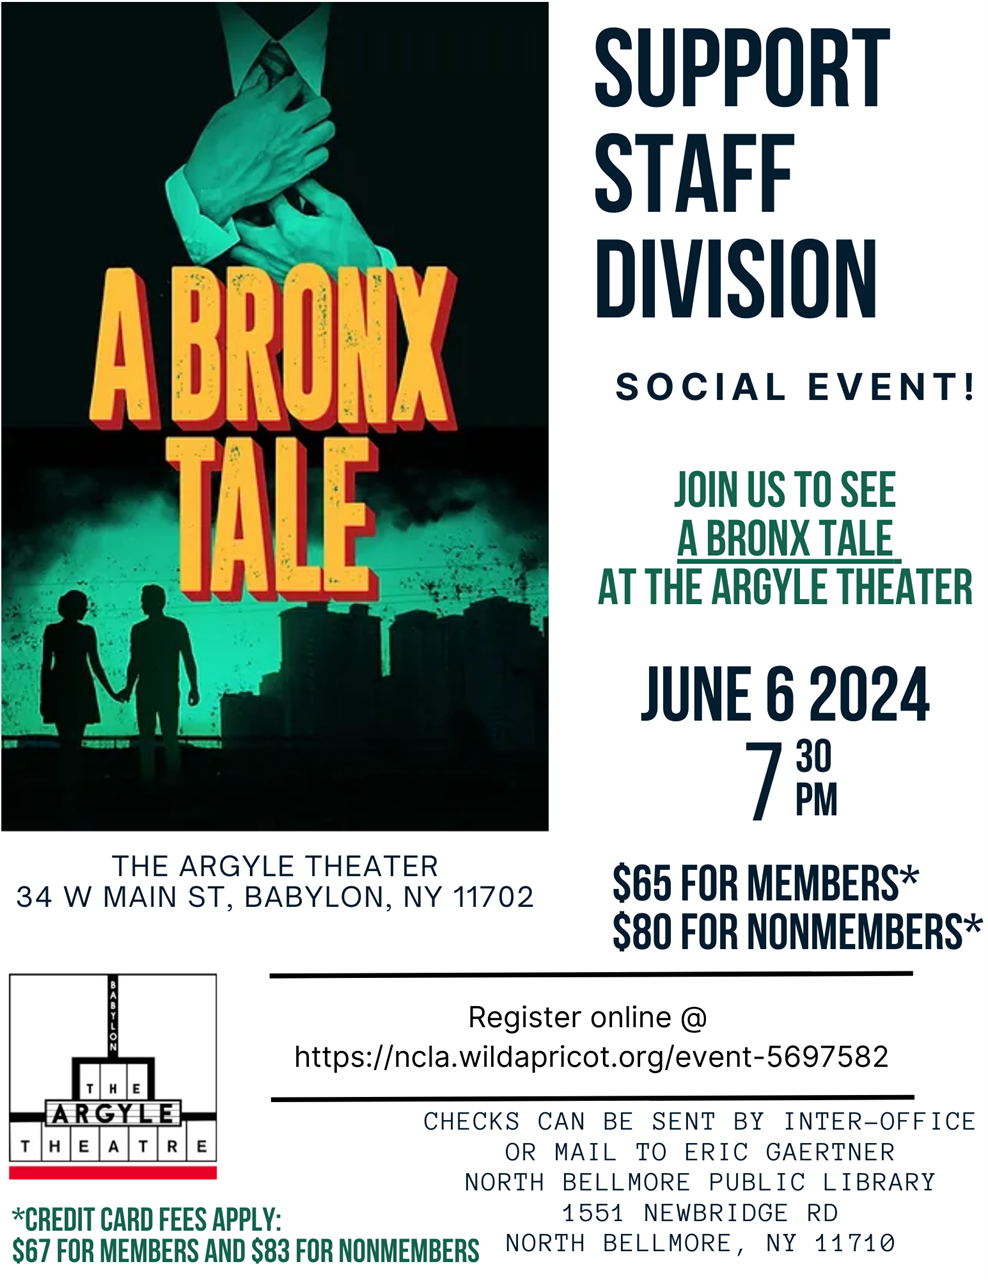 Support Staff Division - A Bronx Tale (6 Jun 2024)